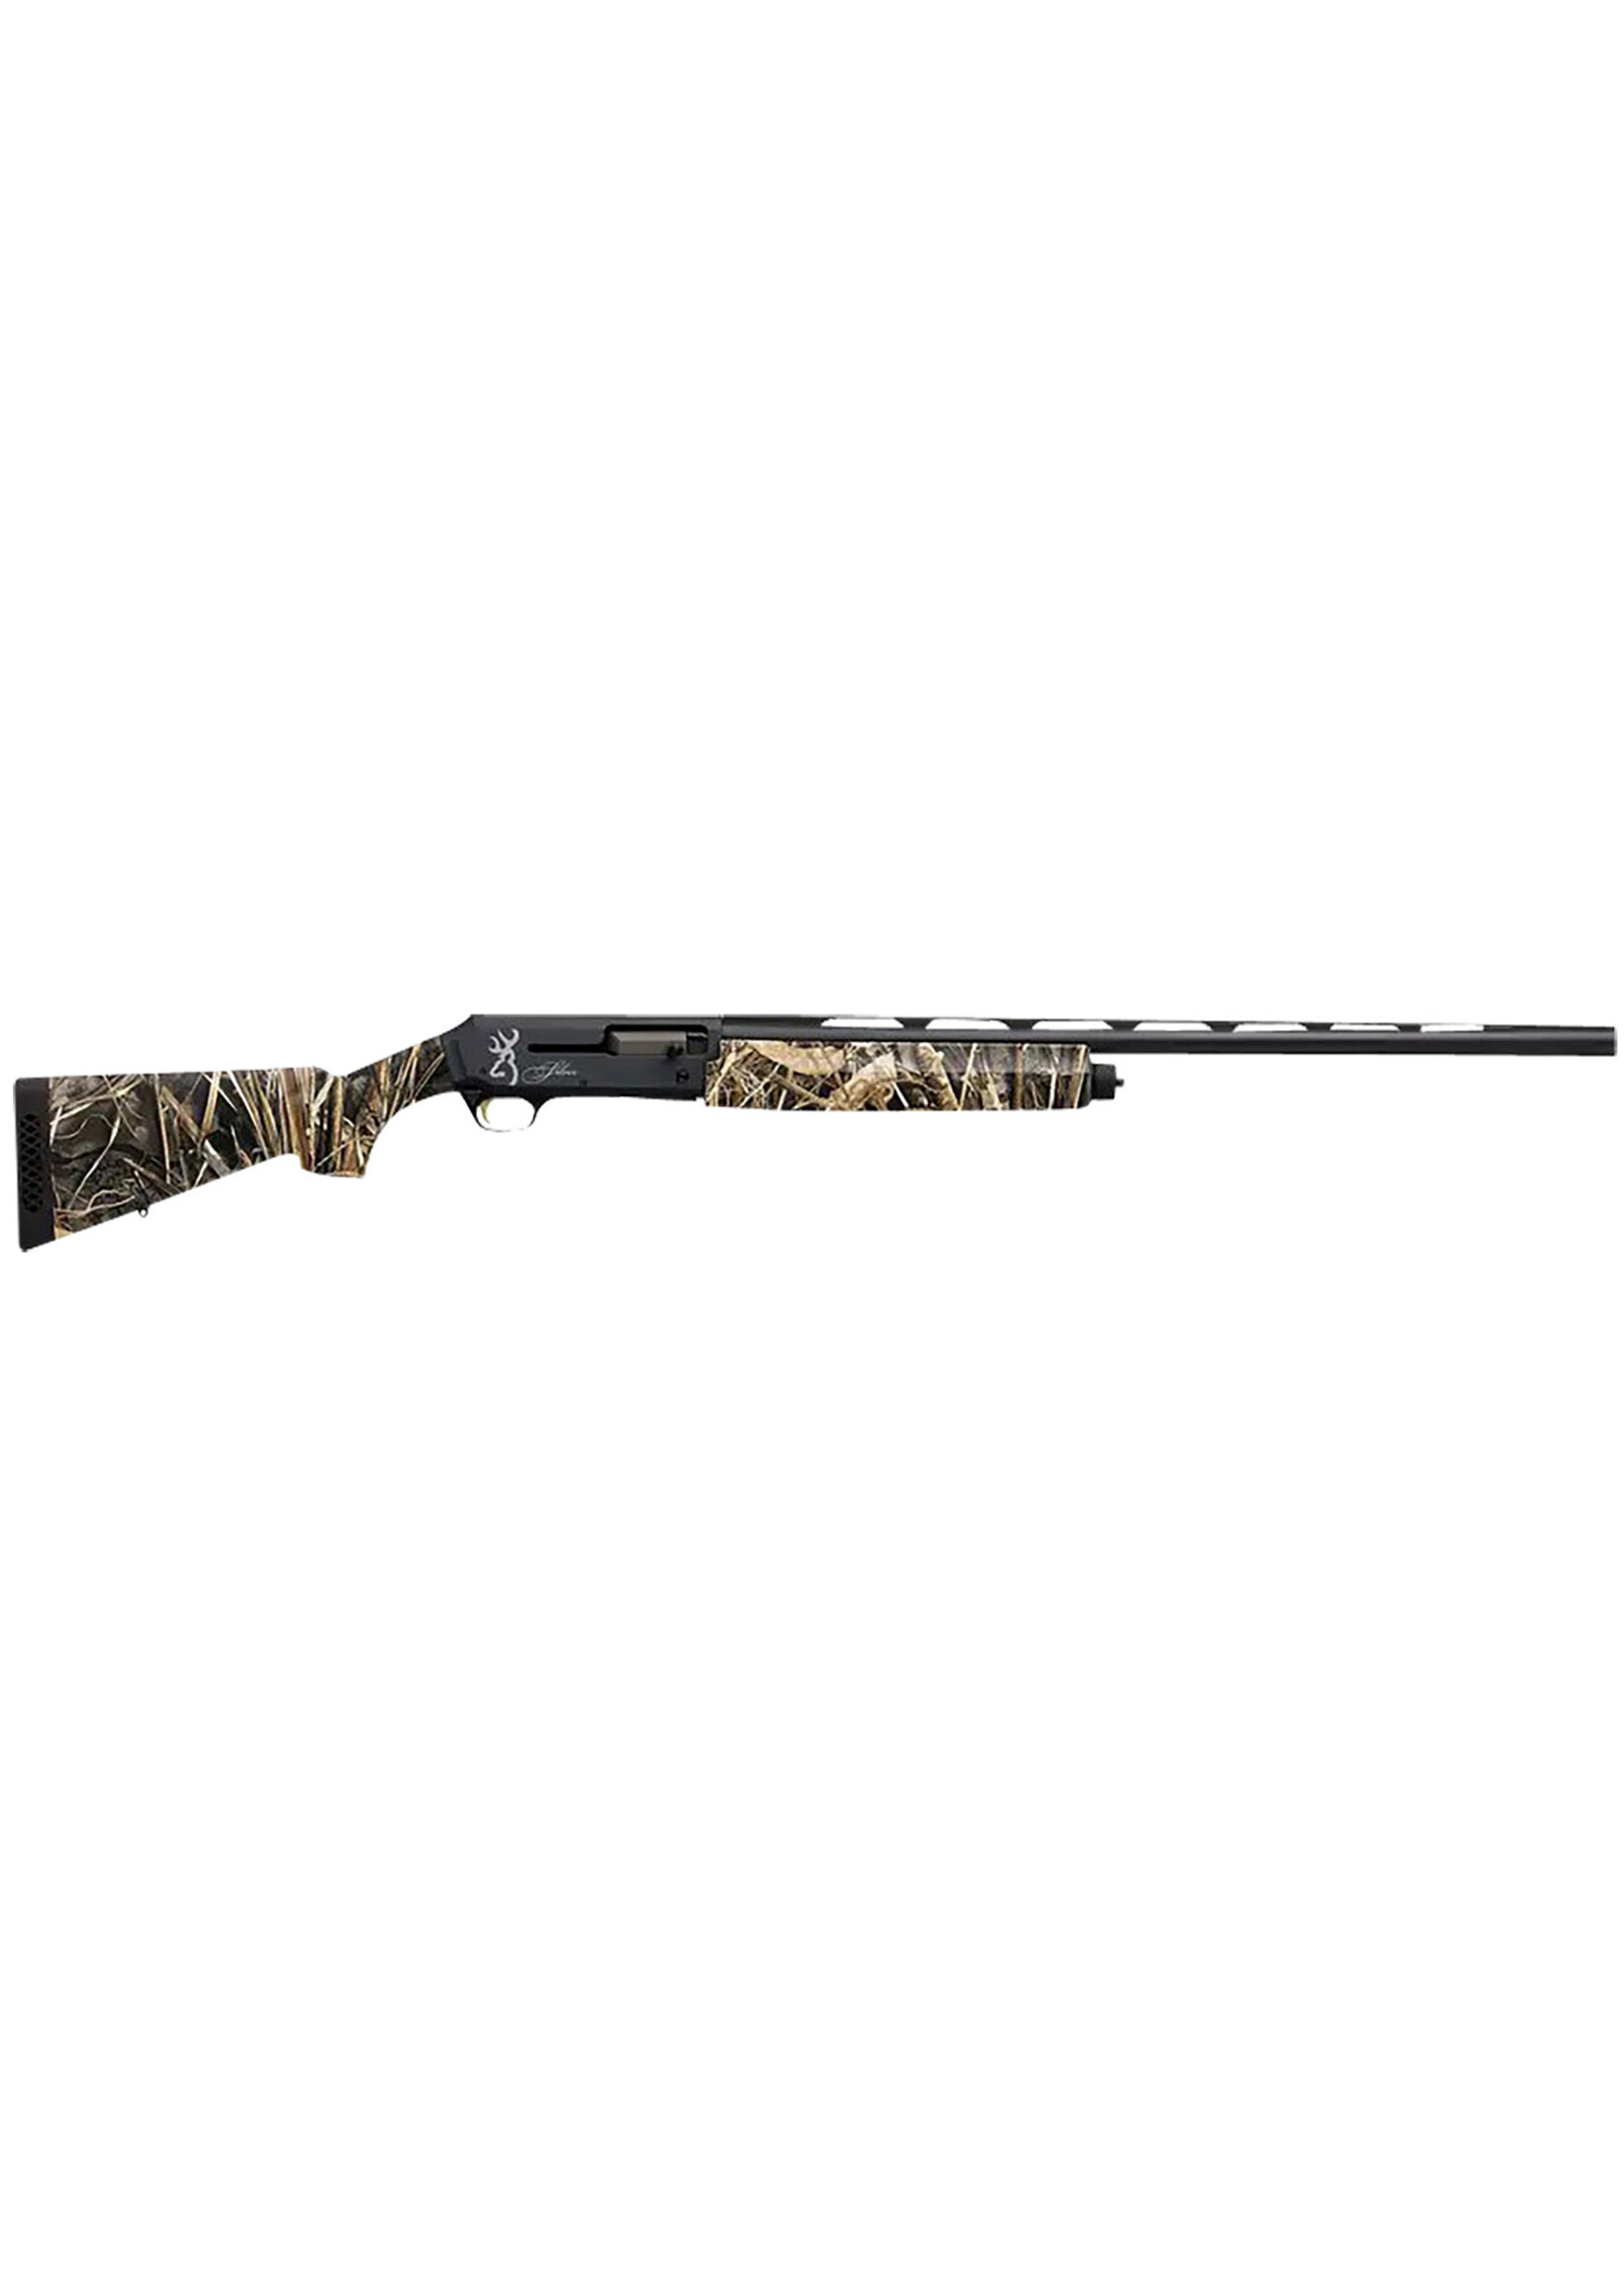 Browning Browning 011435204 Silver Field 12 Gauge 3.5" 4+1 28", Two-Tone Gray/Black Barrel/Rec, Realtree Max-7 Synthetic Furniture, 3 Chokes Included